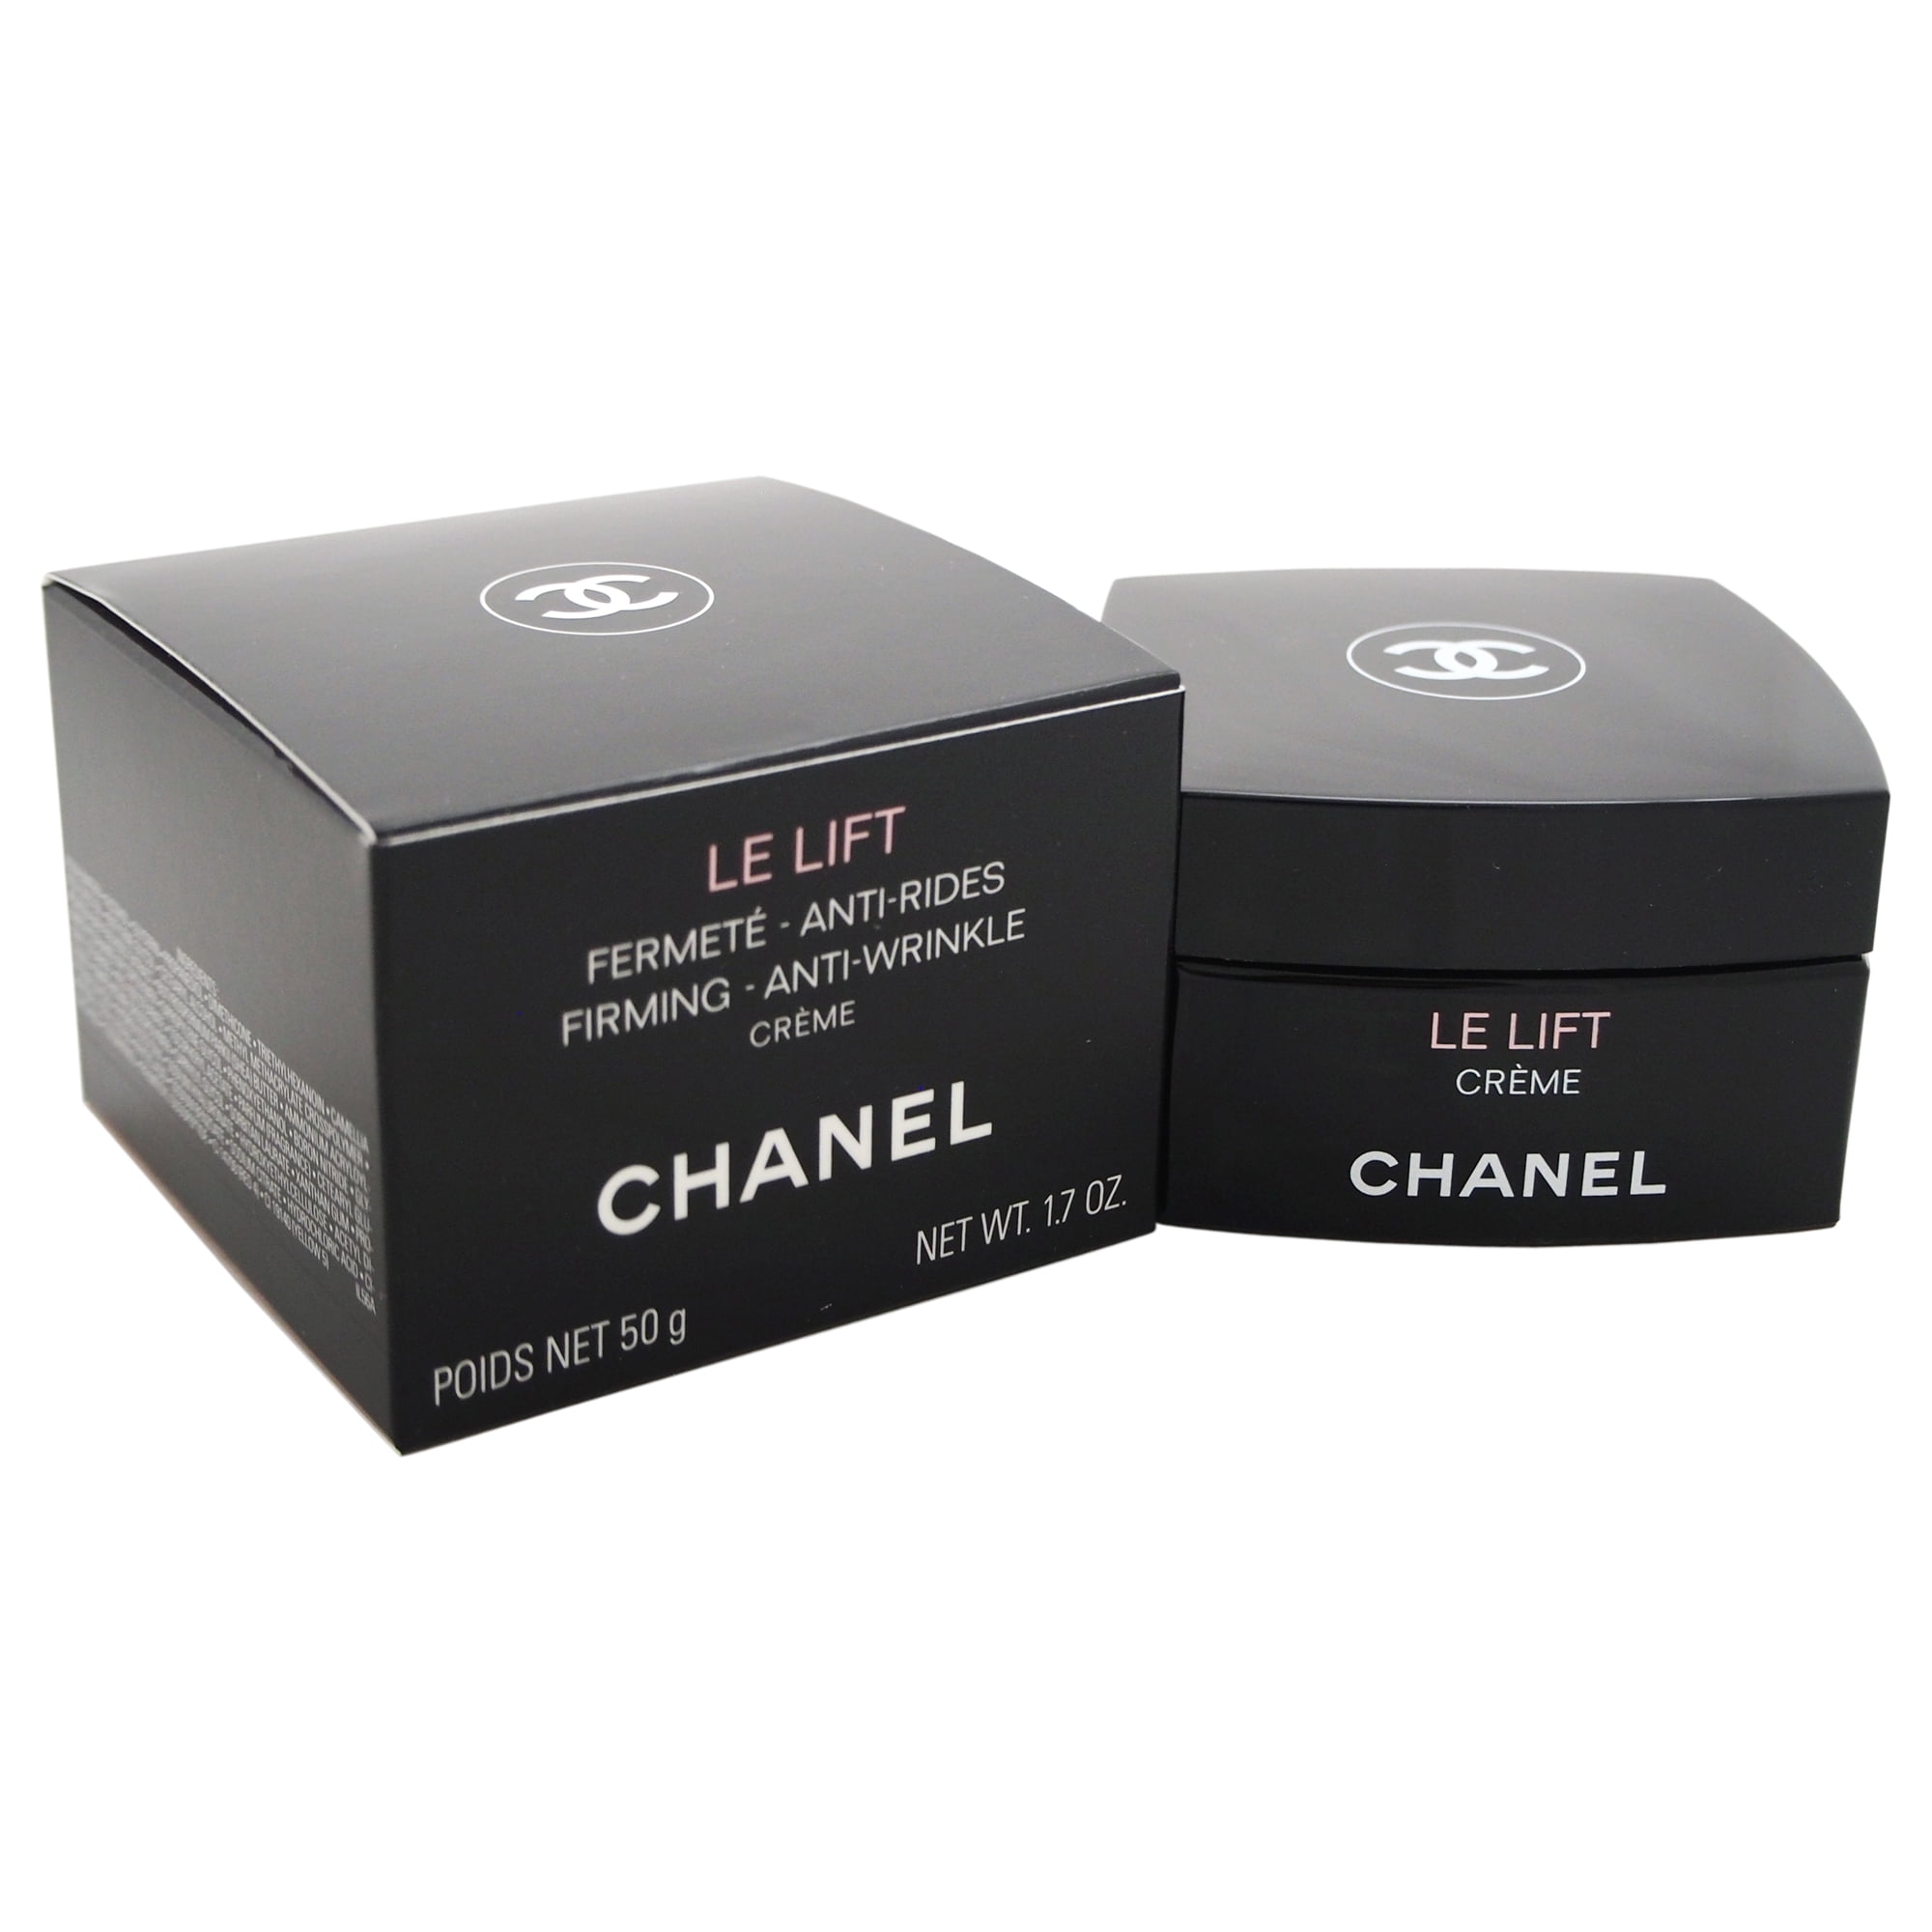 CHANEL - Le Lift Creme Firming Anti-Wrinkle Cream by Chanel for Women ...